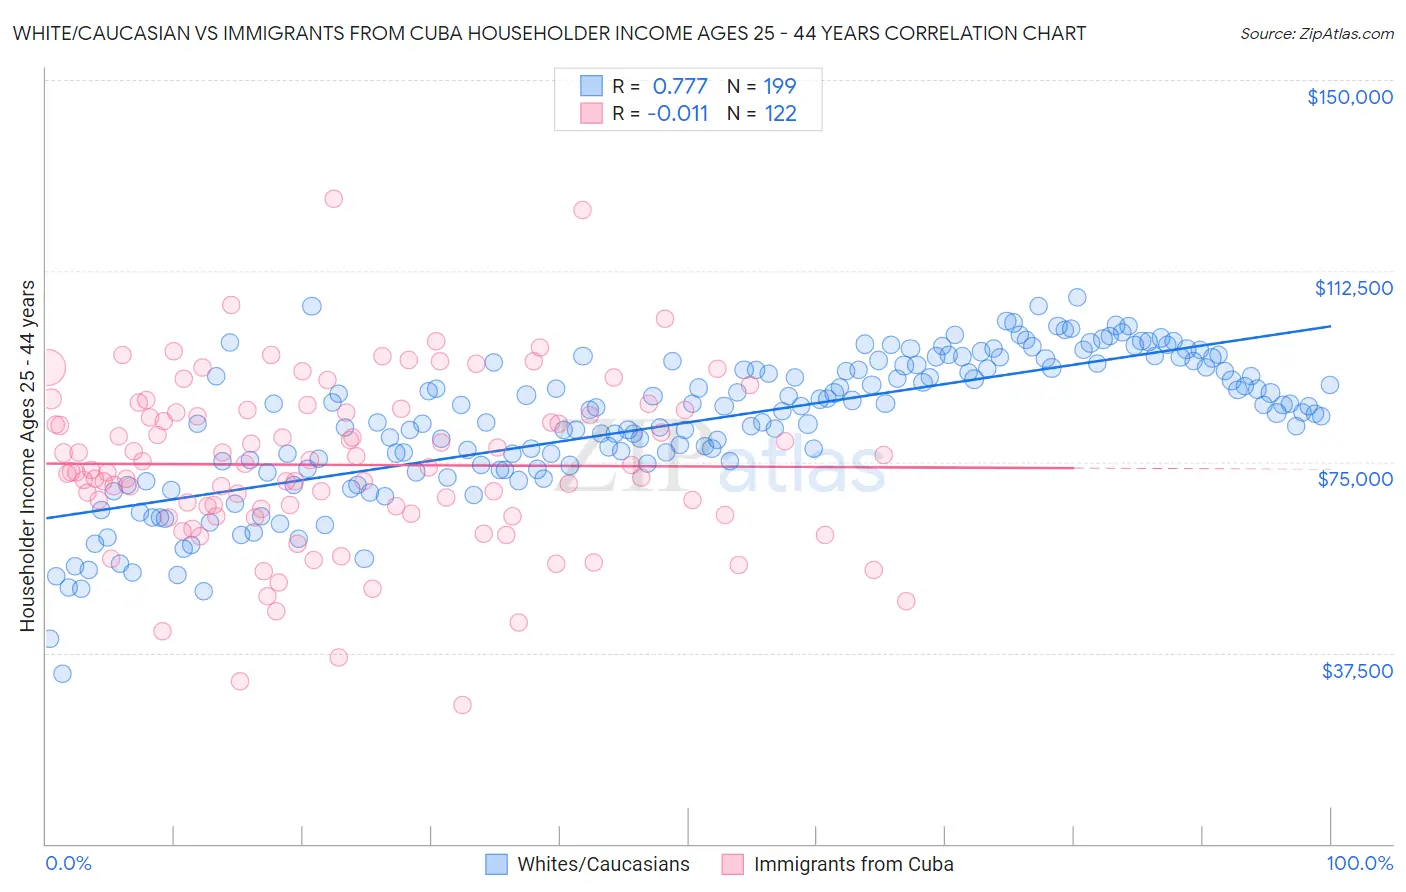 White/Caucasian vs Immigrants from Cuba Householder Income Ages 25 - 44 years